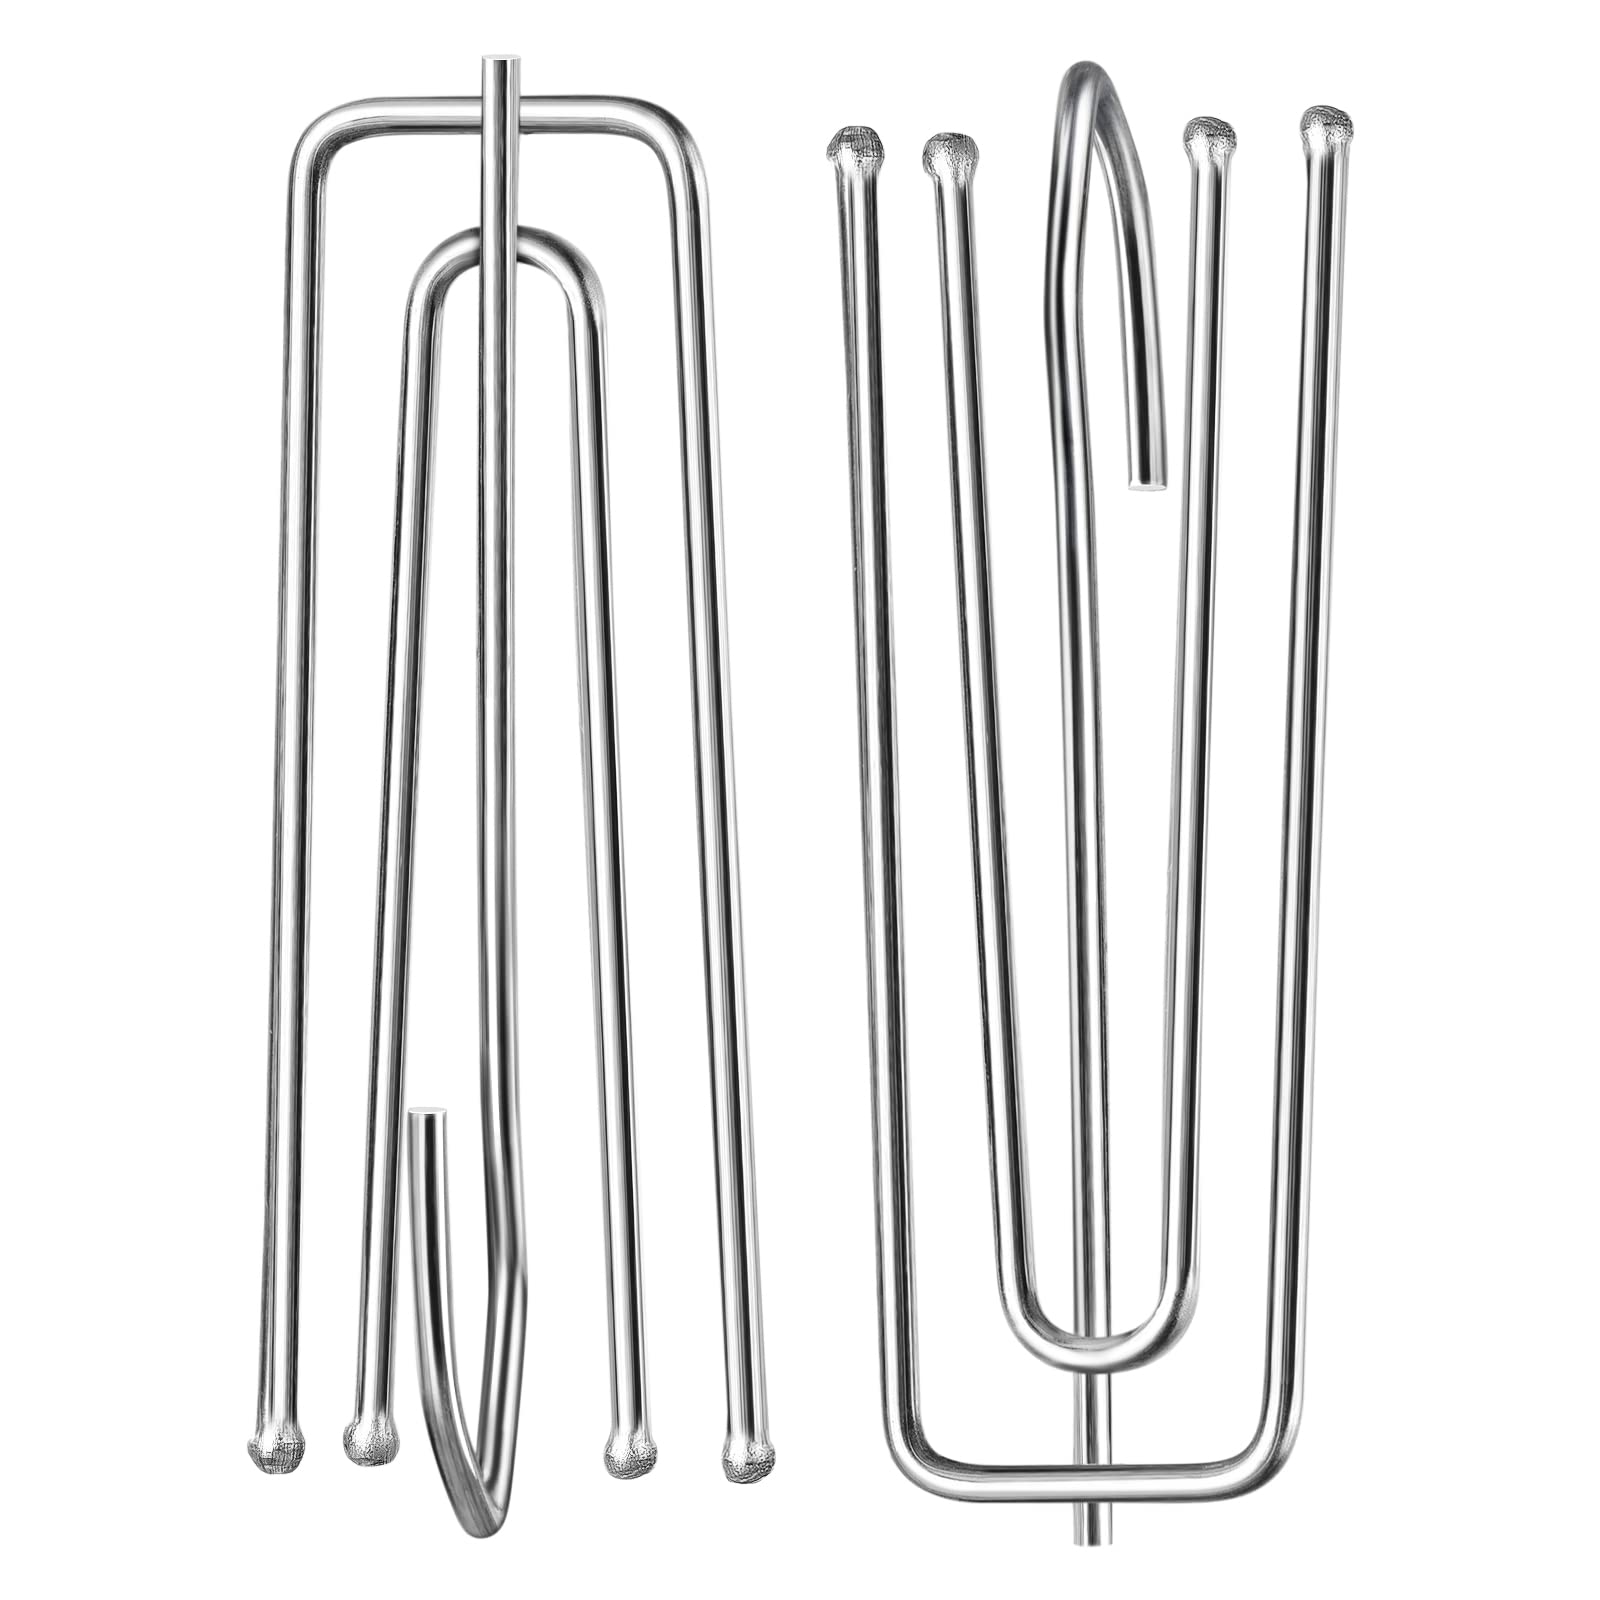 20pcs Stainless Steel Curtain 4 Prongs Pinch Pleat Hooks for Window Cu –  KGORGE Store